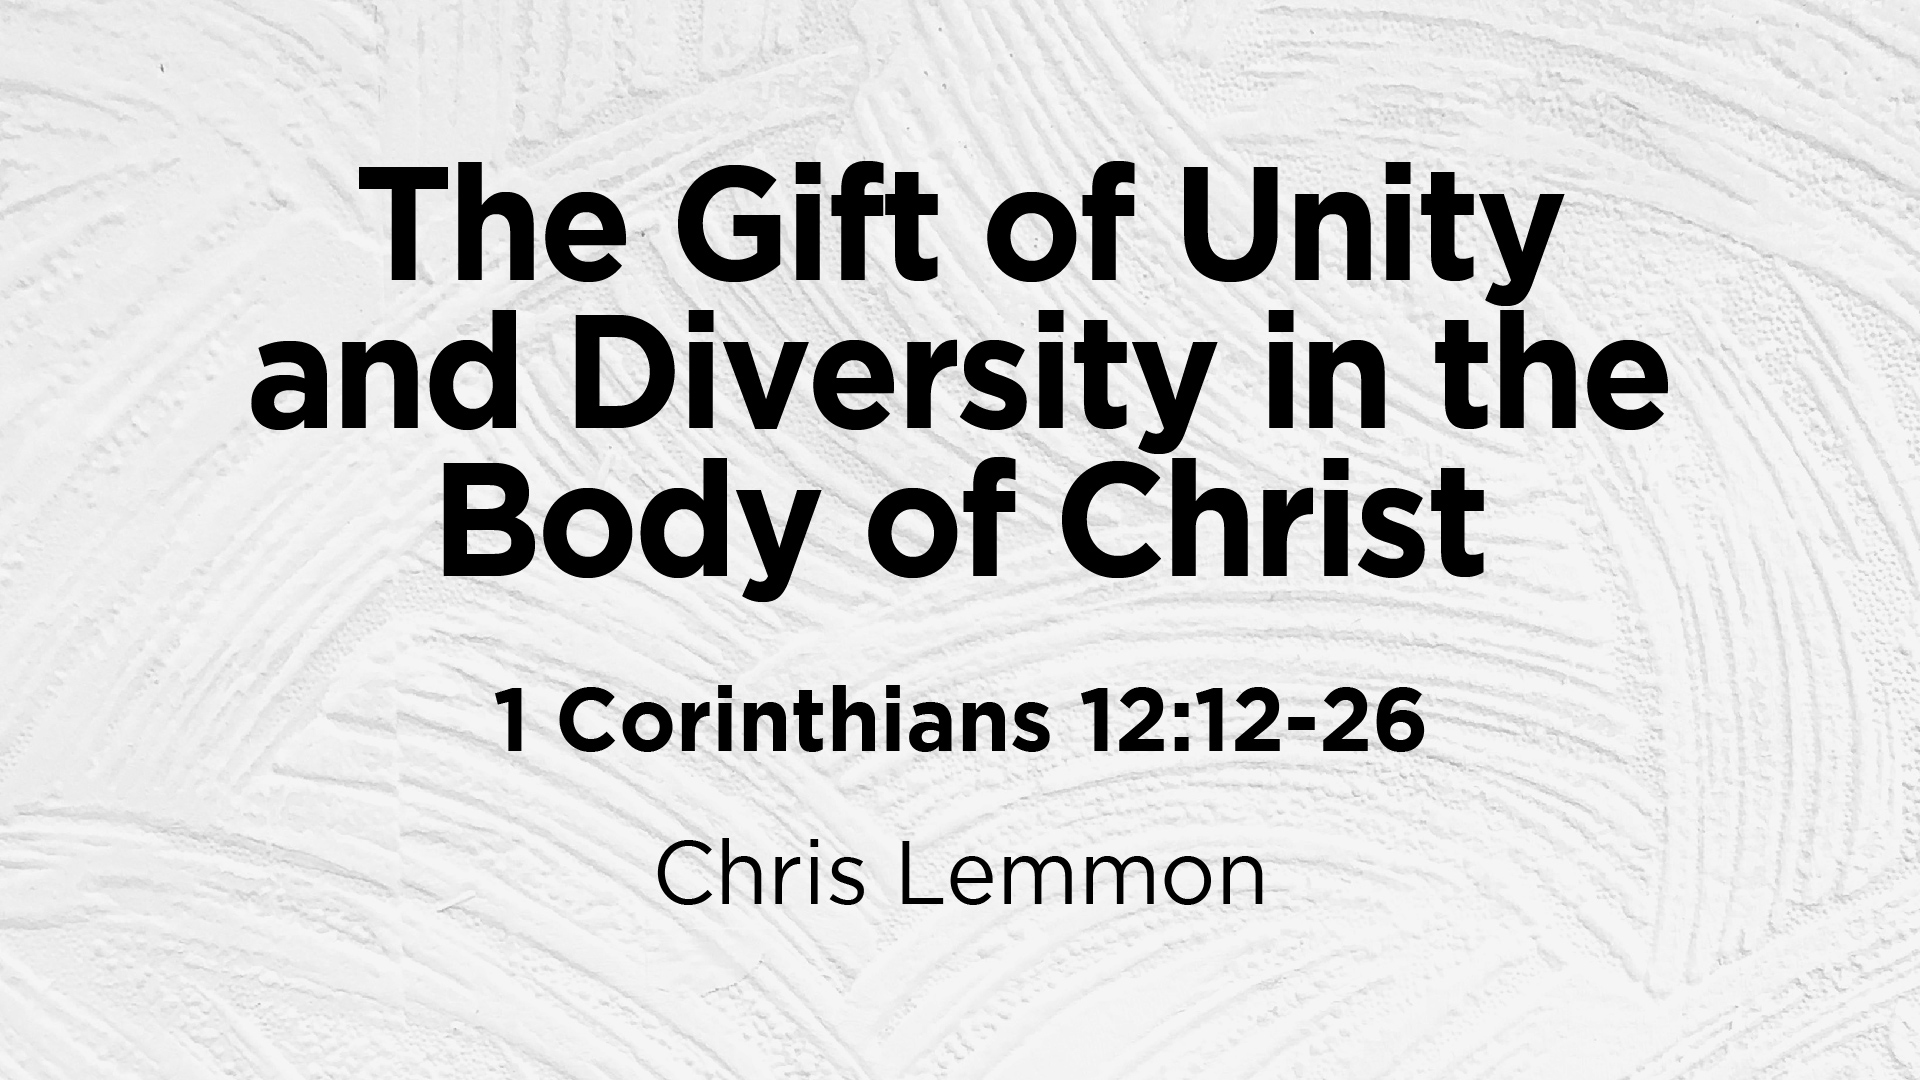 Featured image for “The Gift of Unity and Diversity in the Body of Christ”